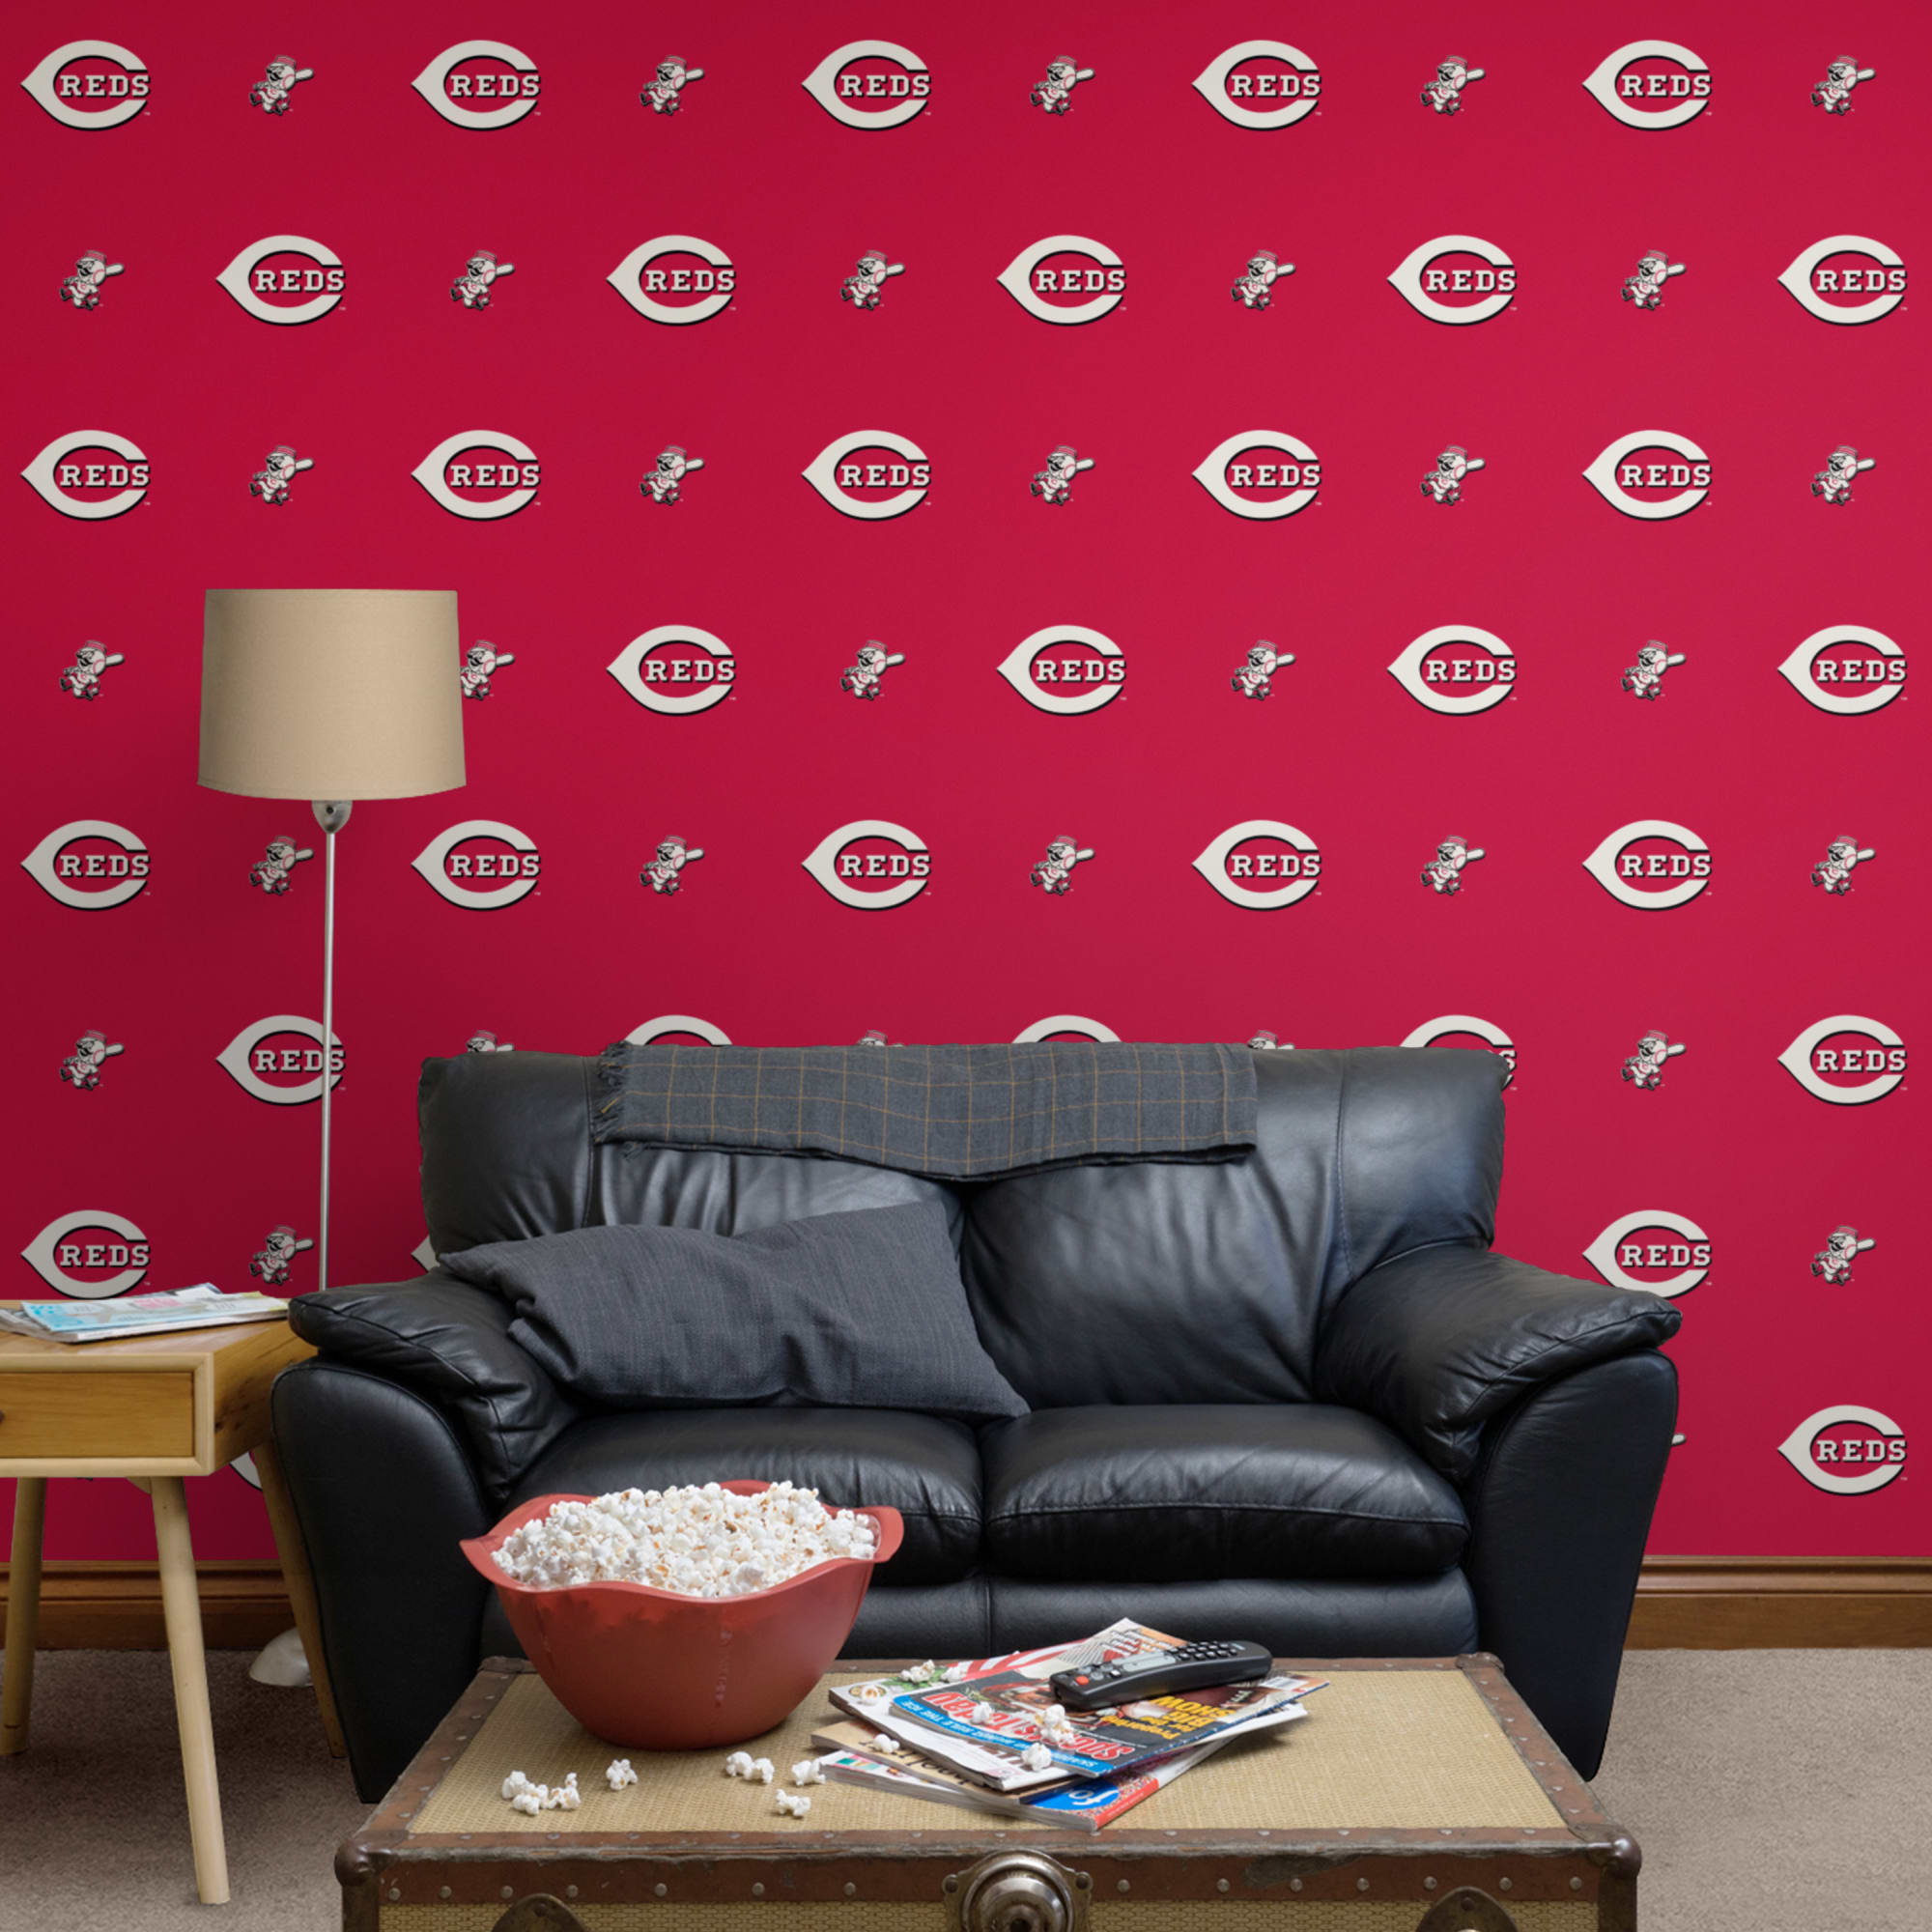 Cincinnati Reds: Logo Pattern - Officially Licensed Removable Wallpaper 12" x 12" Sample by Fathead